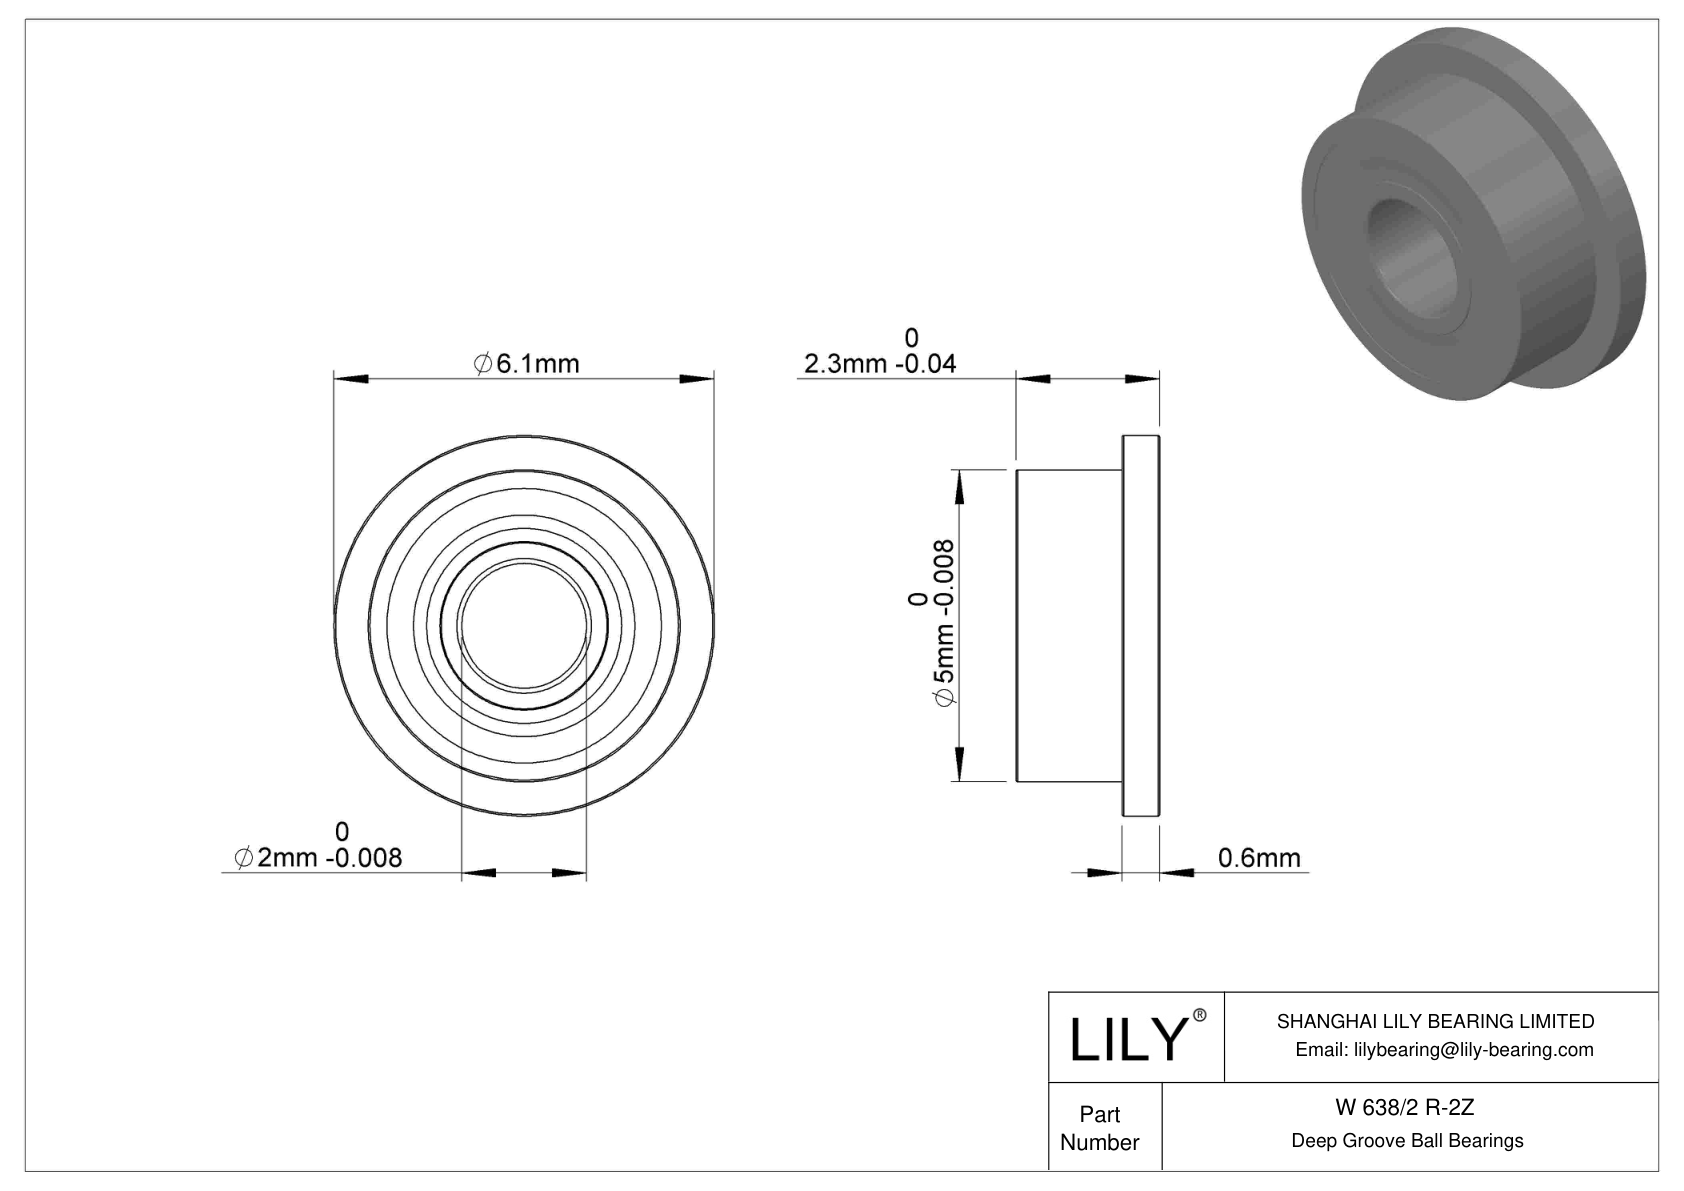 W 638/2 R-2Z Flanged Ball Bearings cad drawing